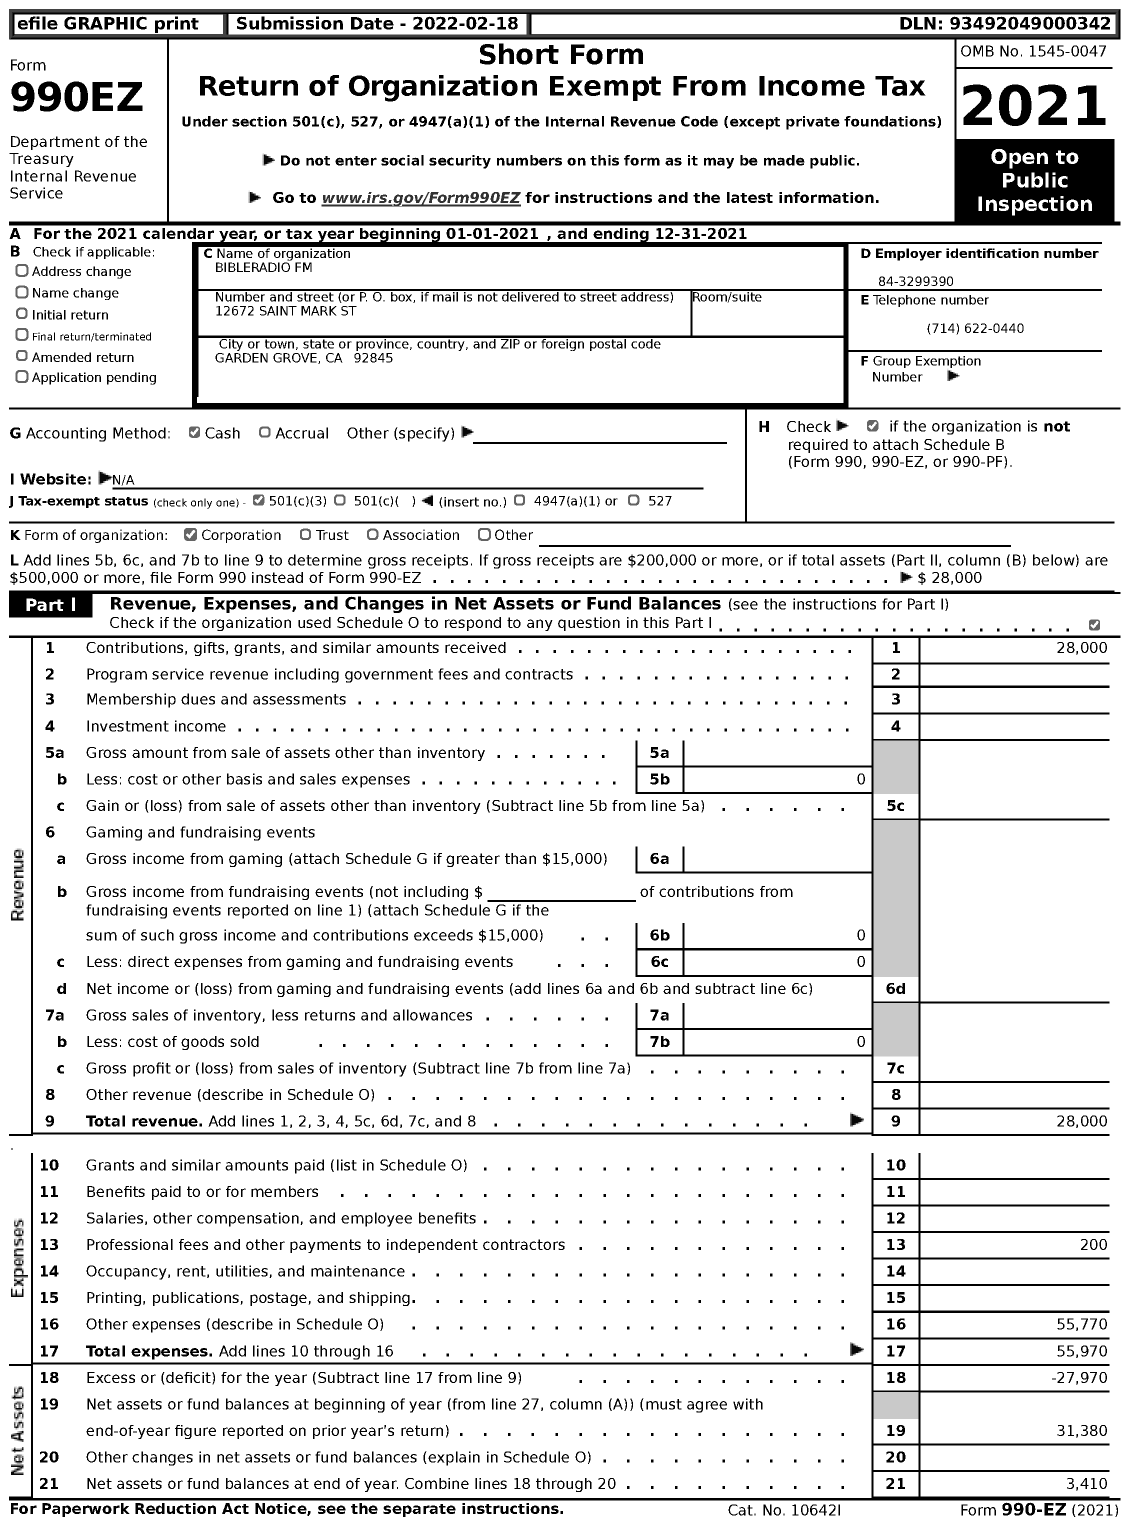 Image of first page of 2021 Form 990EZ for Bibleradio FM